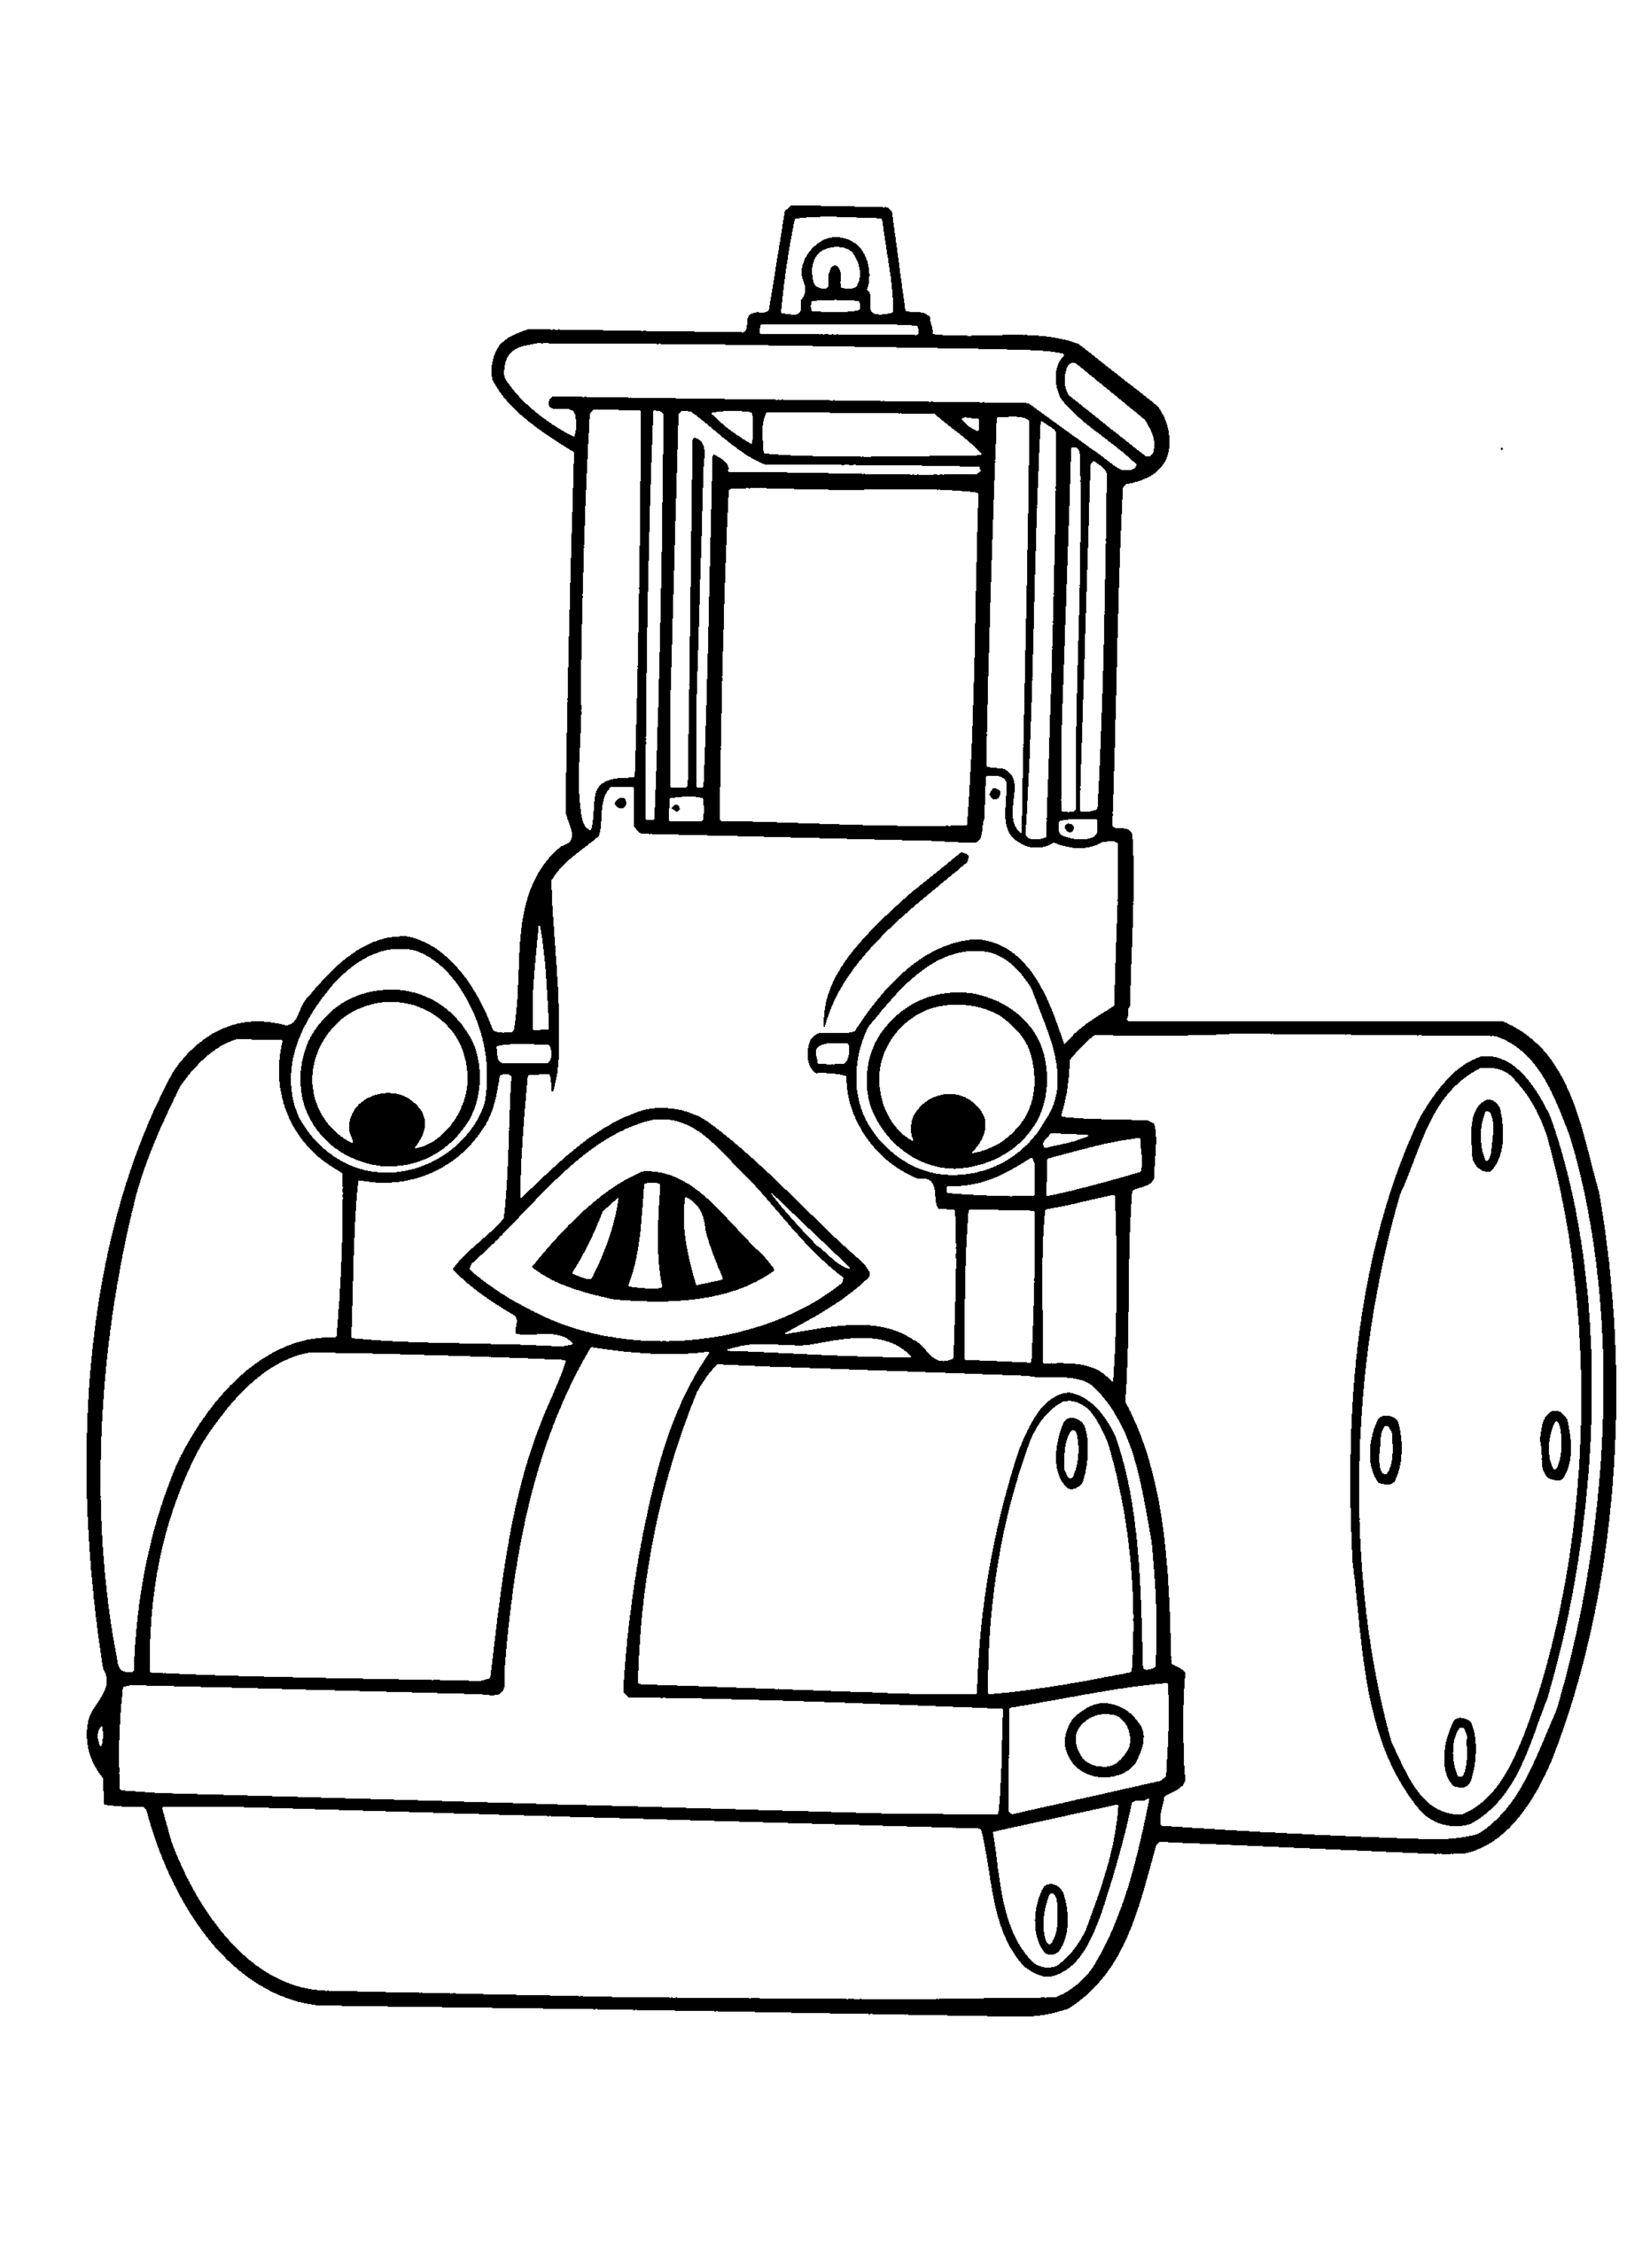 Bob the Builder Coloring Pages TV Film bob the builder 60 Printable 2020 01082 Coloring4free